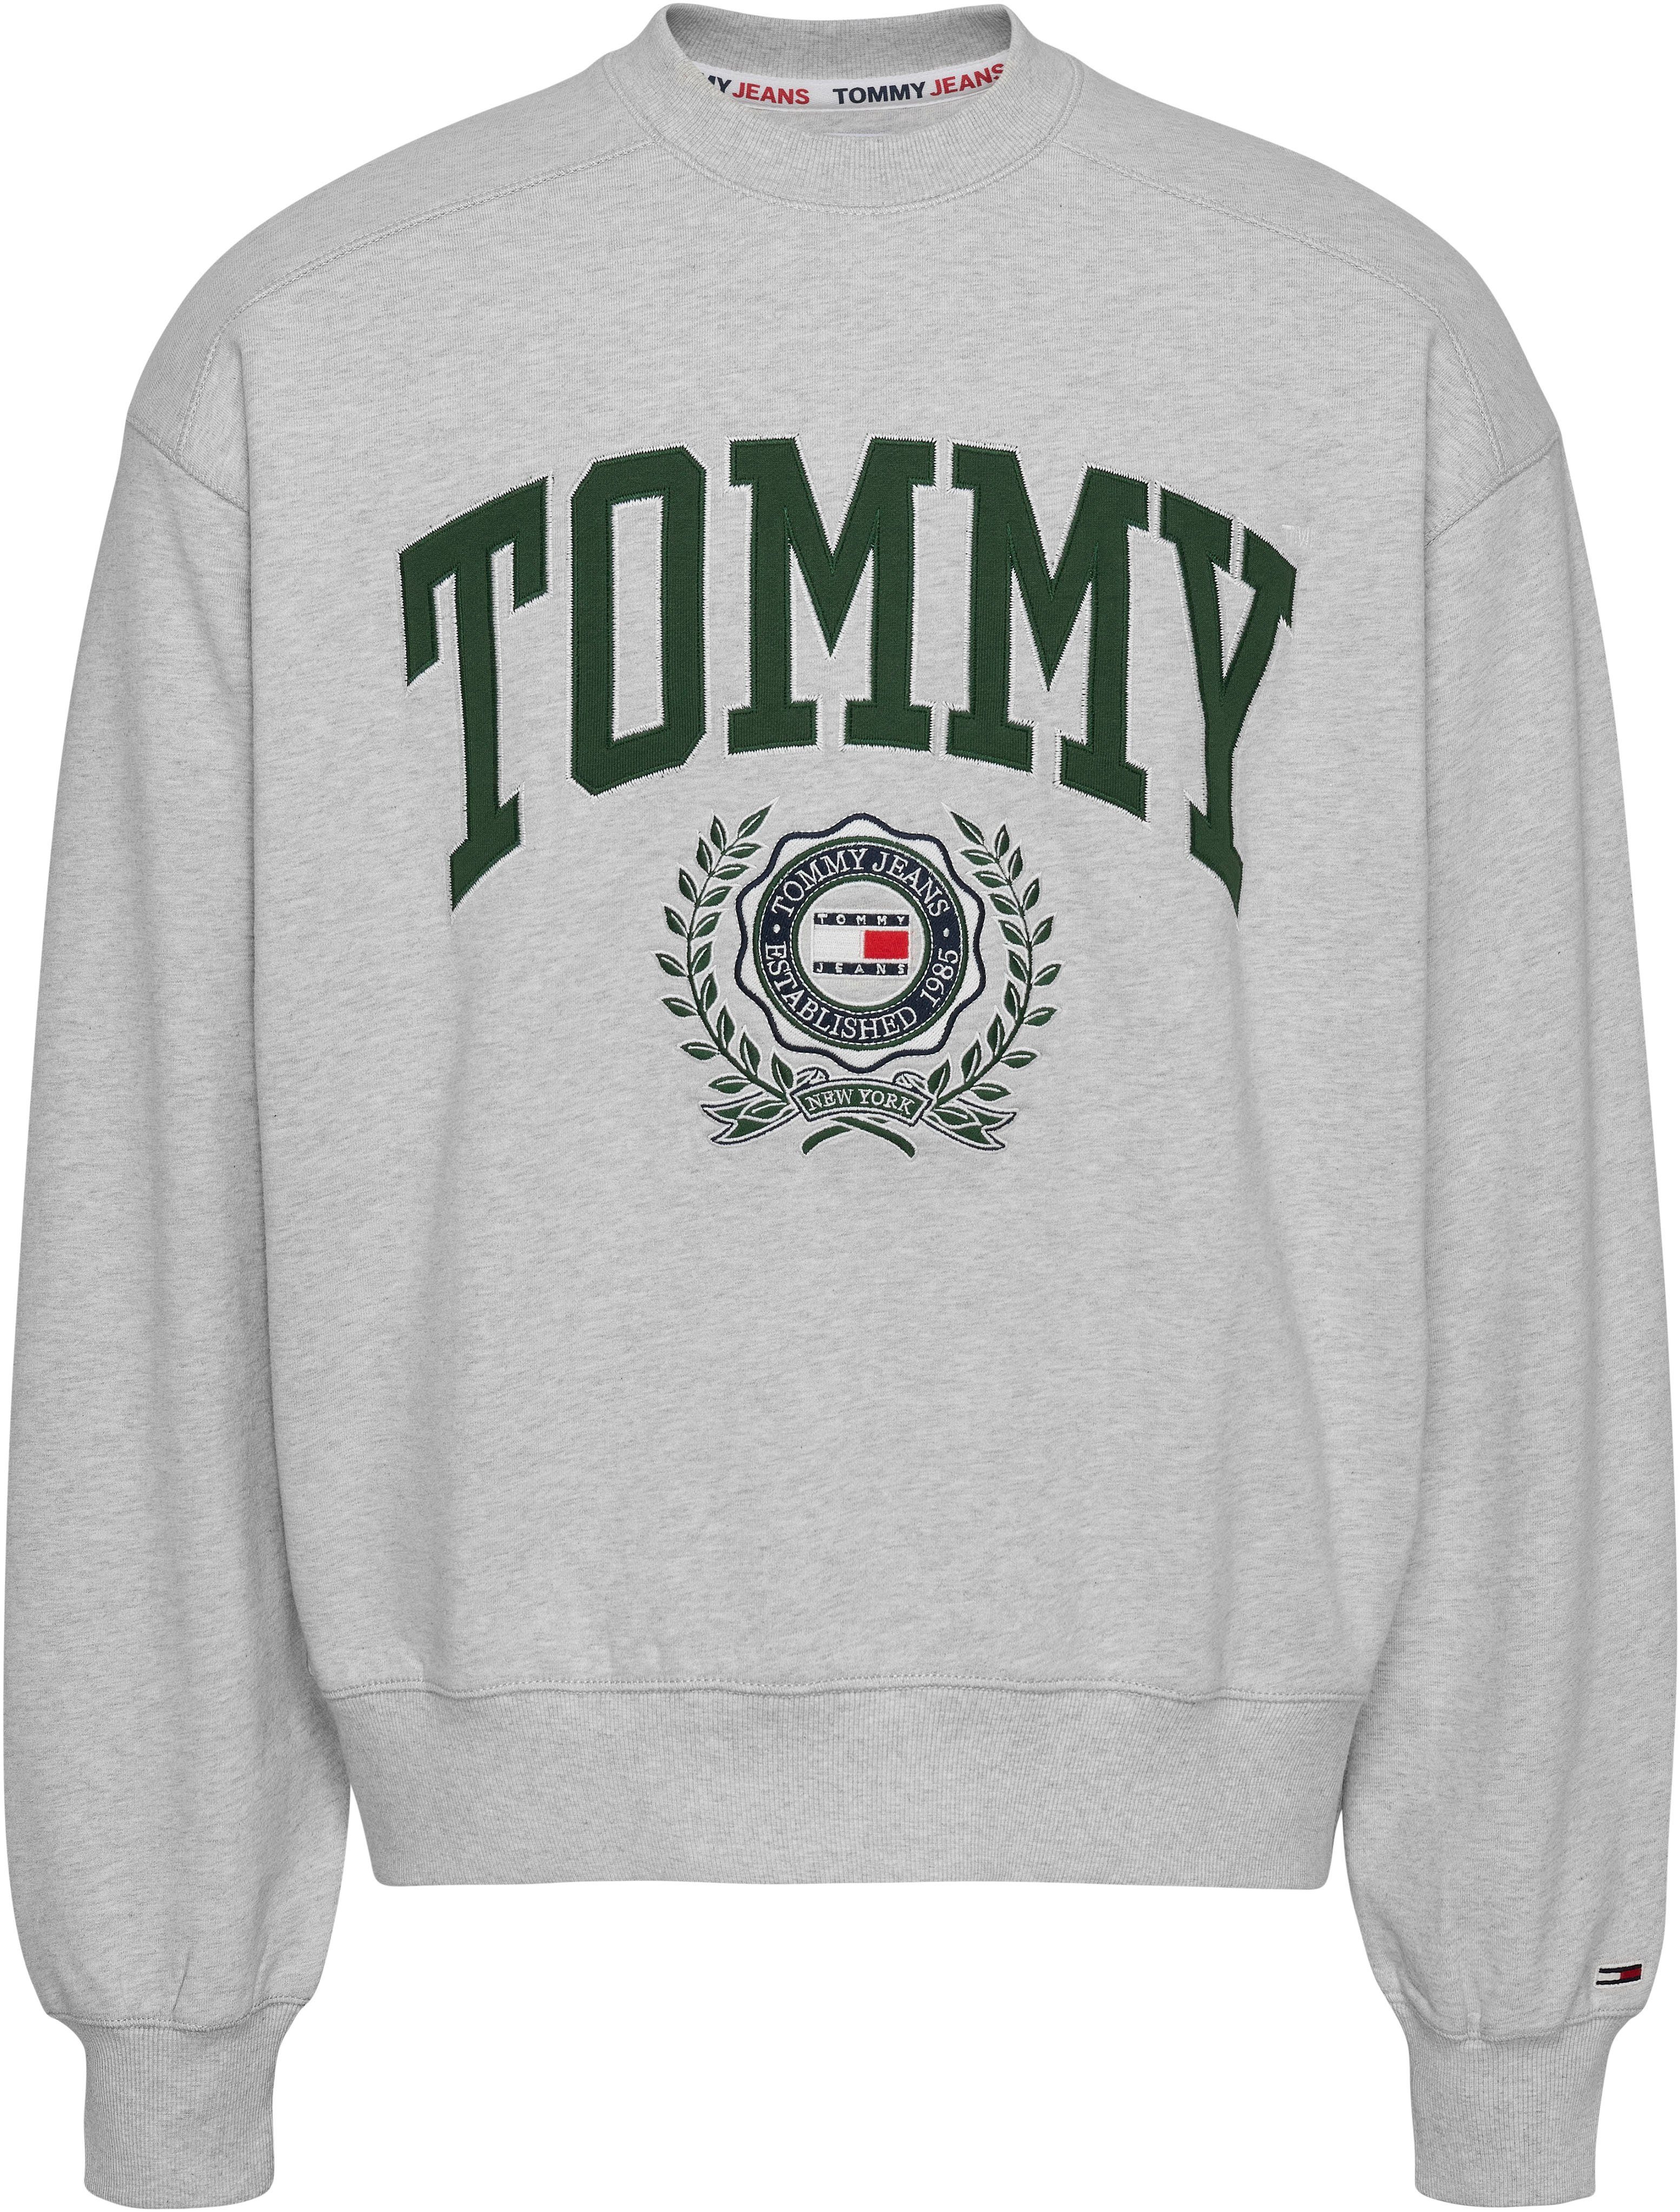 COLLEGE GRAPHIC Tommy CREW TJM BOXY Jeans Grey Silver Sweatshirt